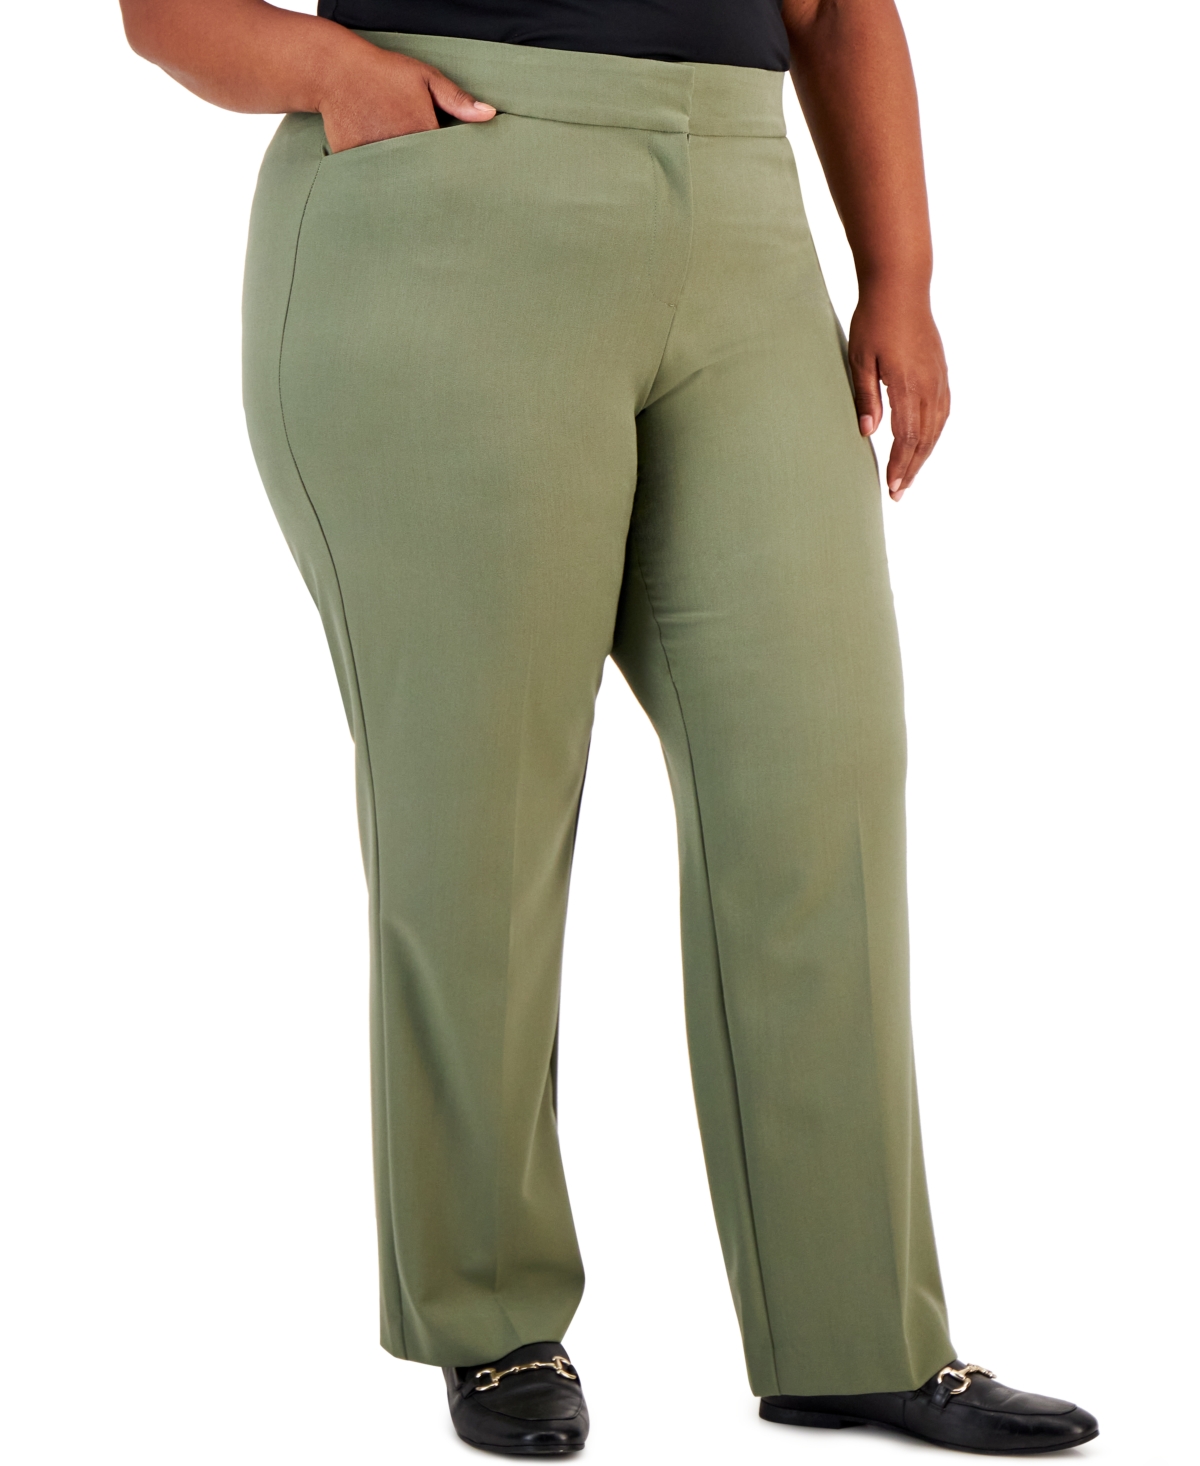 Plus & Petite Plus Size Curvy-Fit Straight-Leg Pants, Created for Macy's - New Fawn